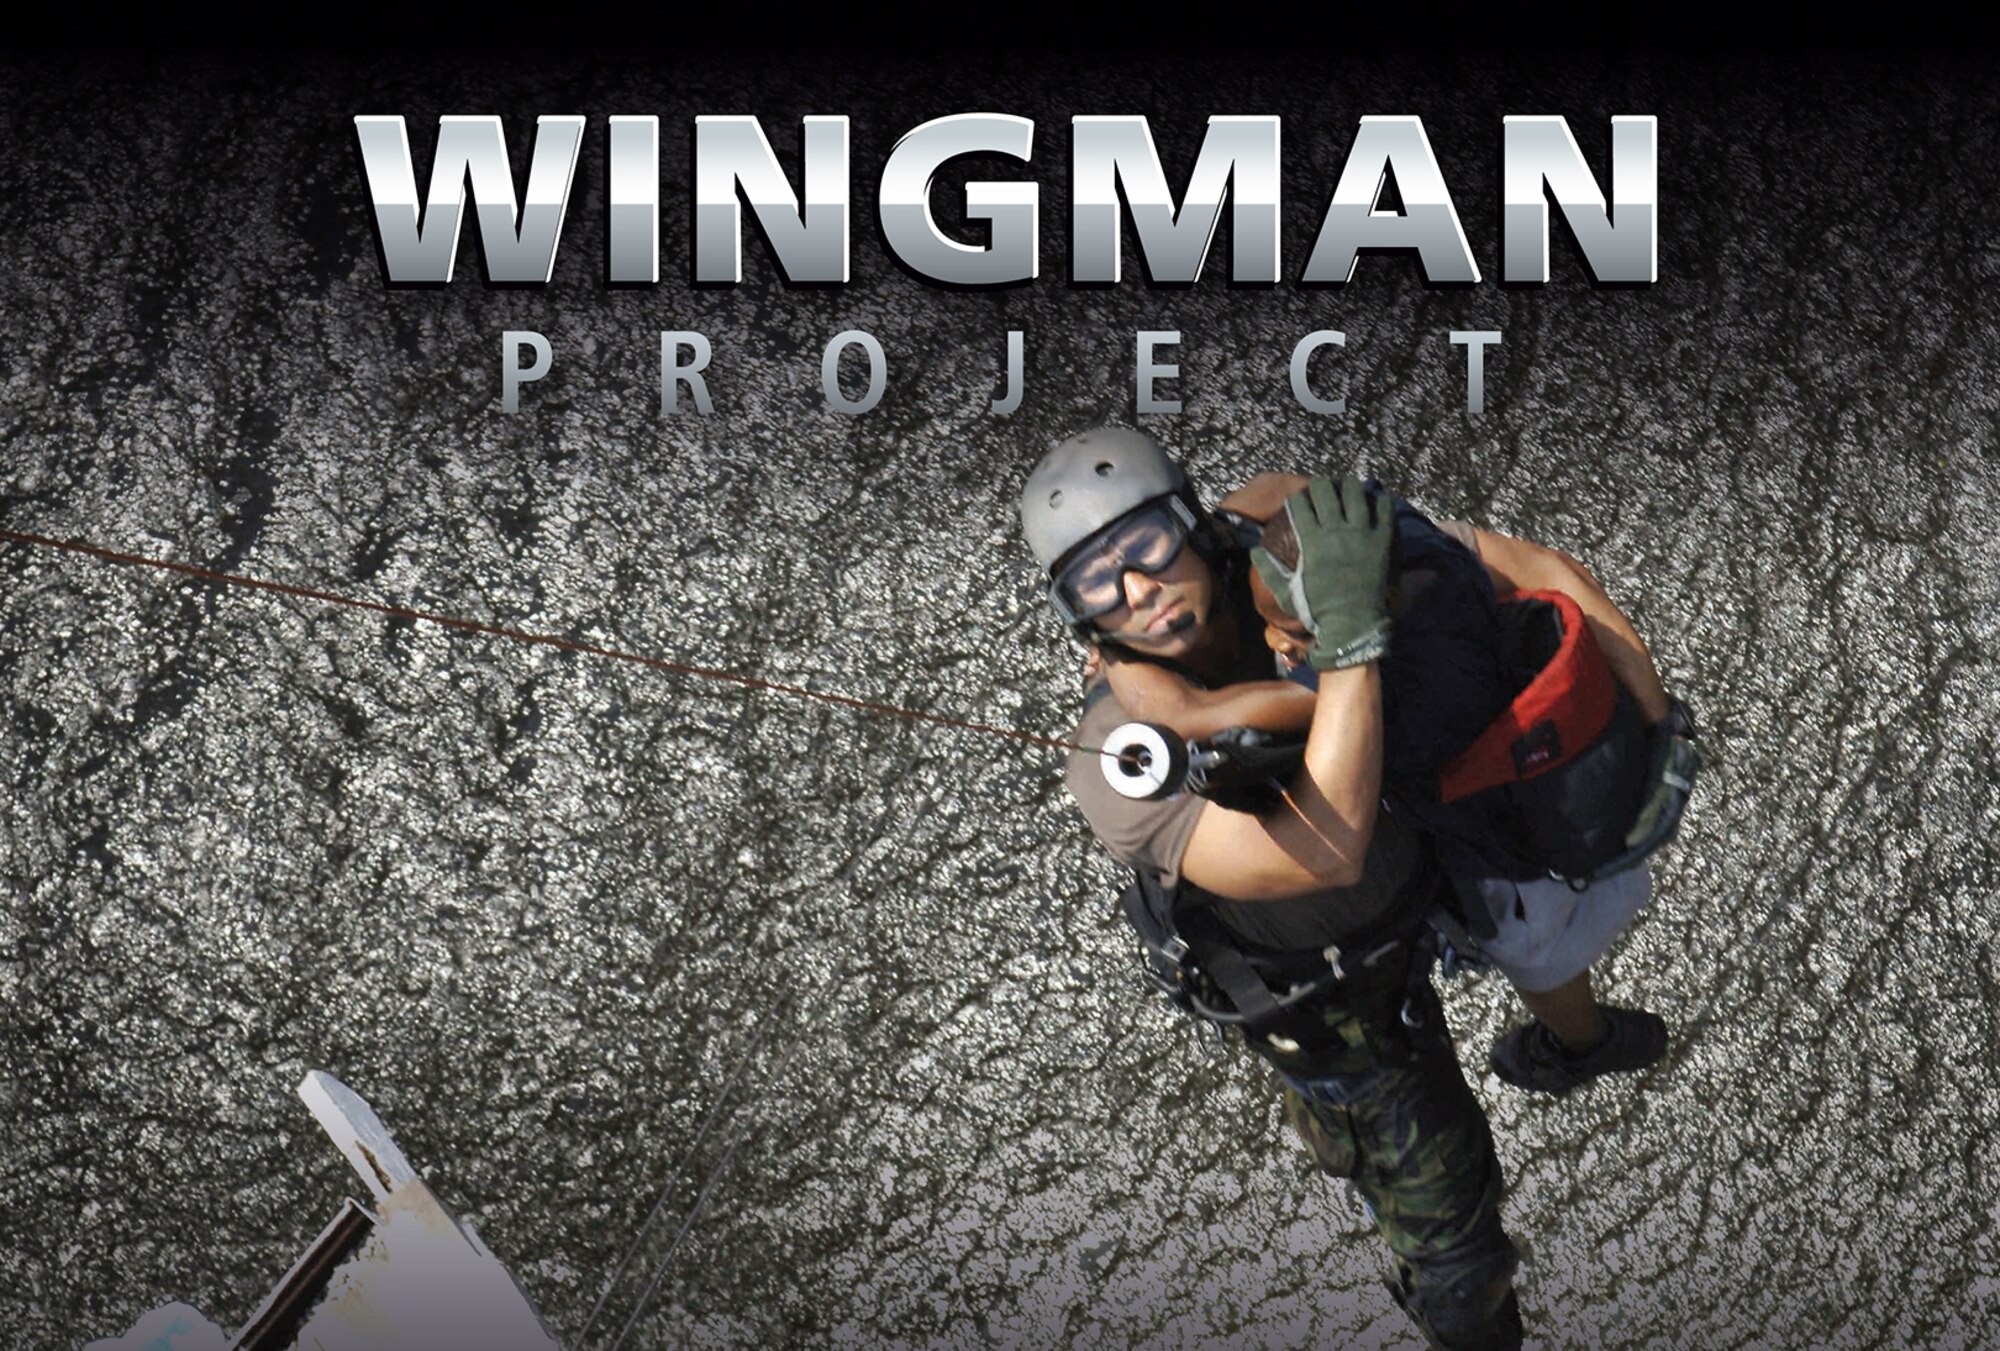 The Wingman Toolkit is an Air Force Reserve initiative to empower Airmen and their families to sustain healthy, balanced lifestyles using the four pillars of Comprehensive Airman Fitness. (U.S. Air Force graphic)

